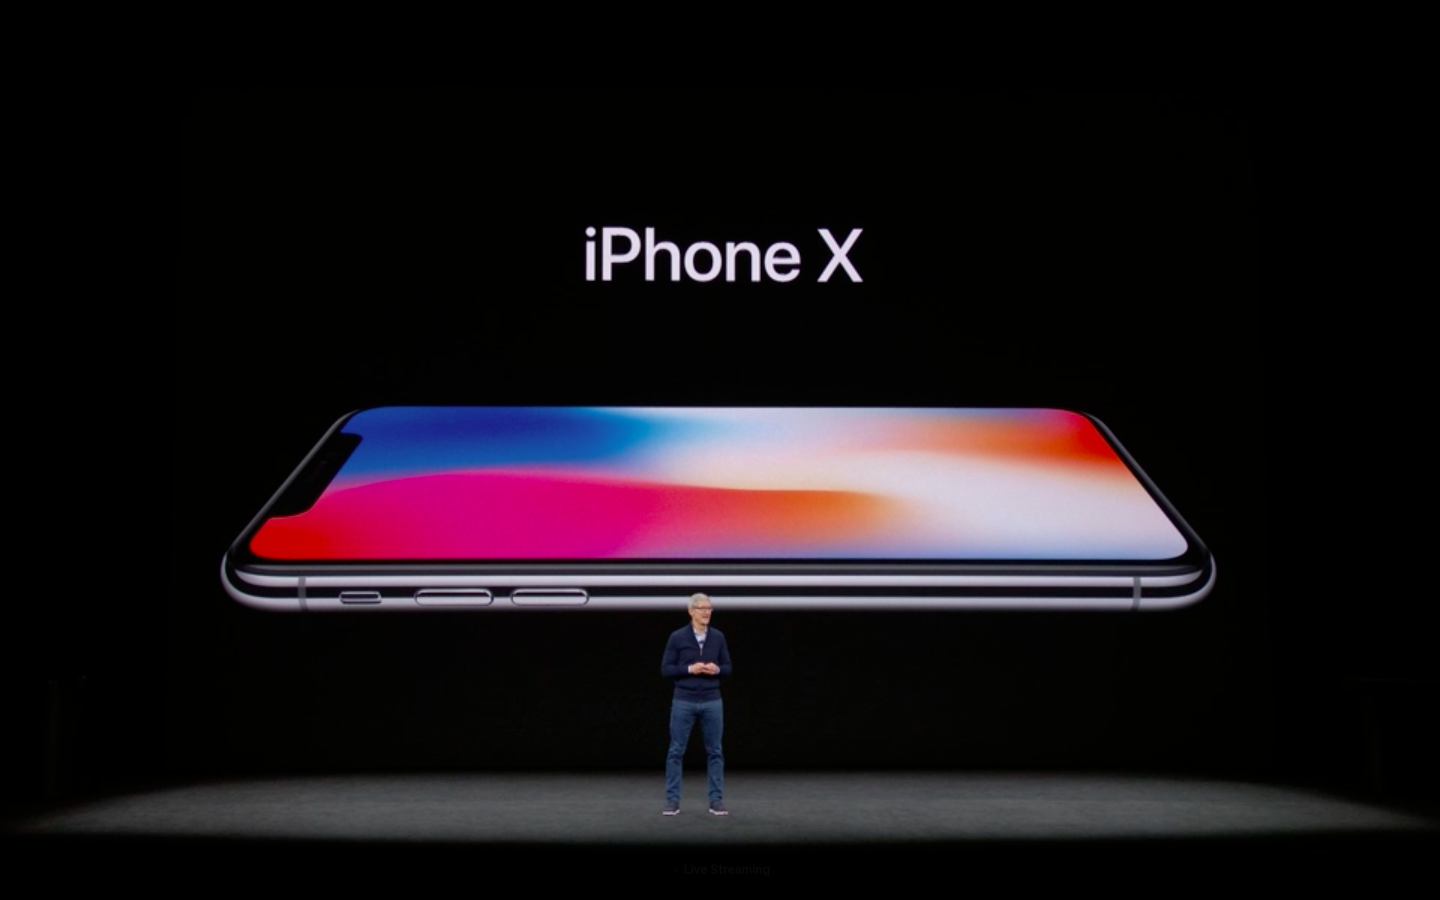 Apple’s iPhone X Likely To Make Billions Of Dollars… For Samsung